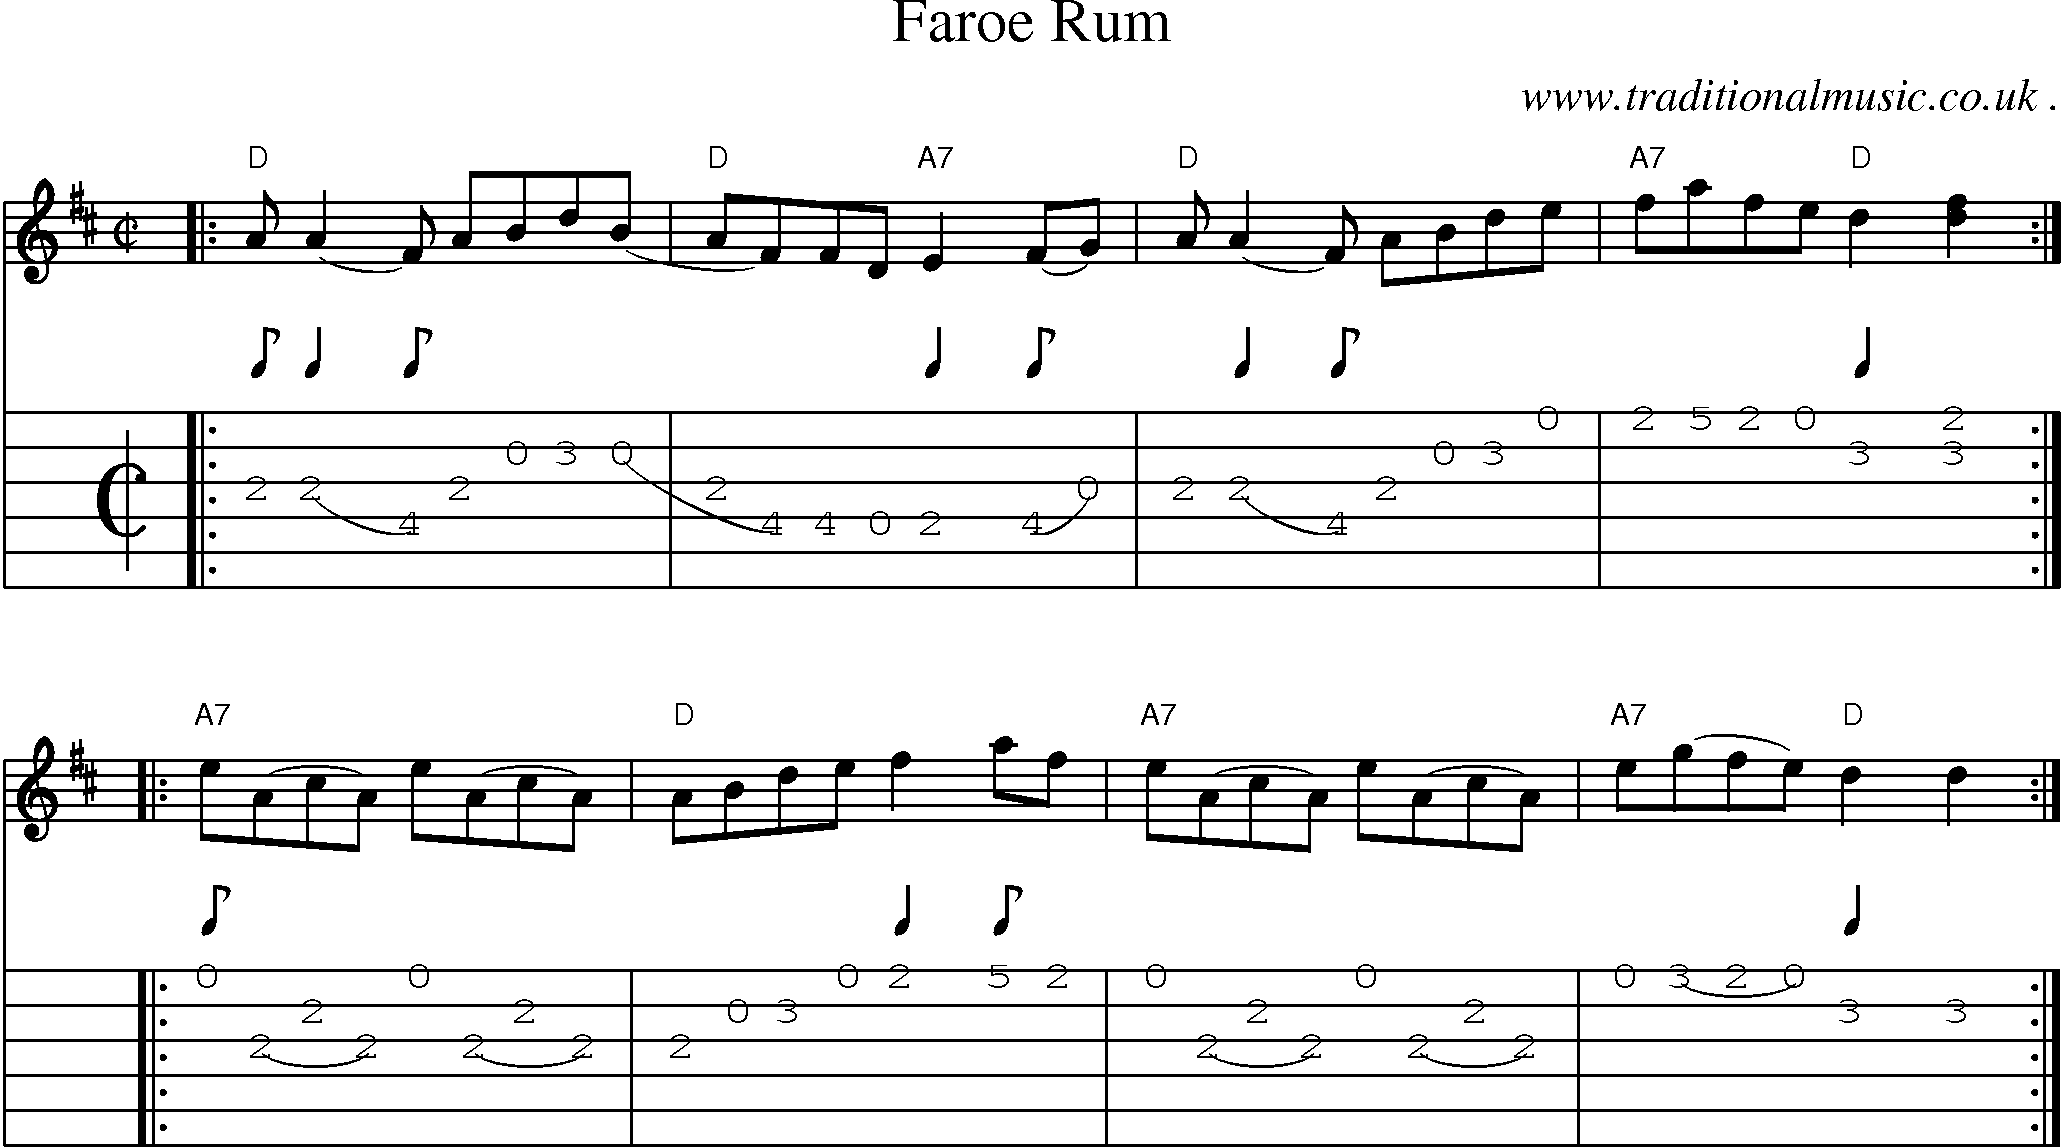 Sheet-music  score, Chords and Guitar Tabs for Faroe Rum